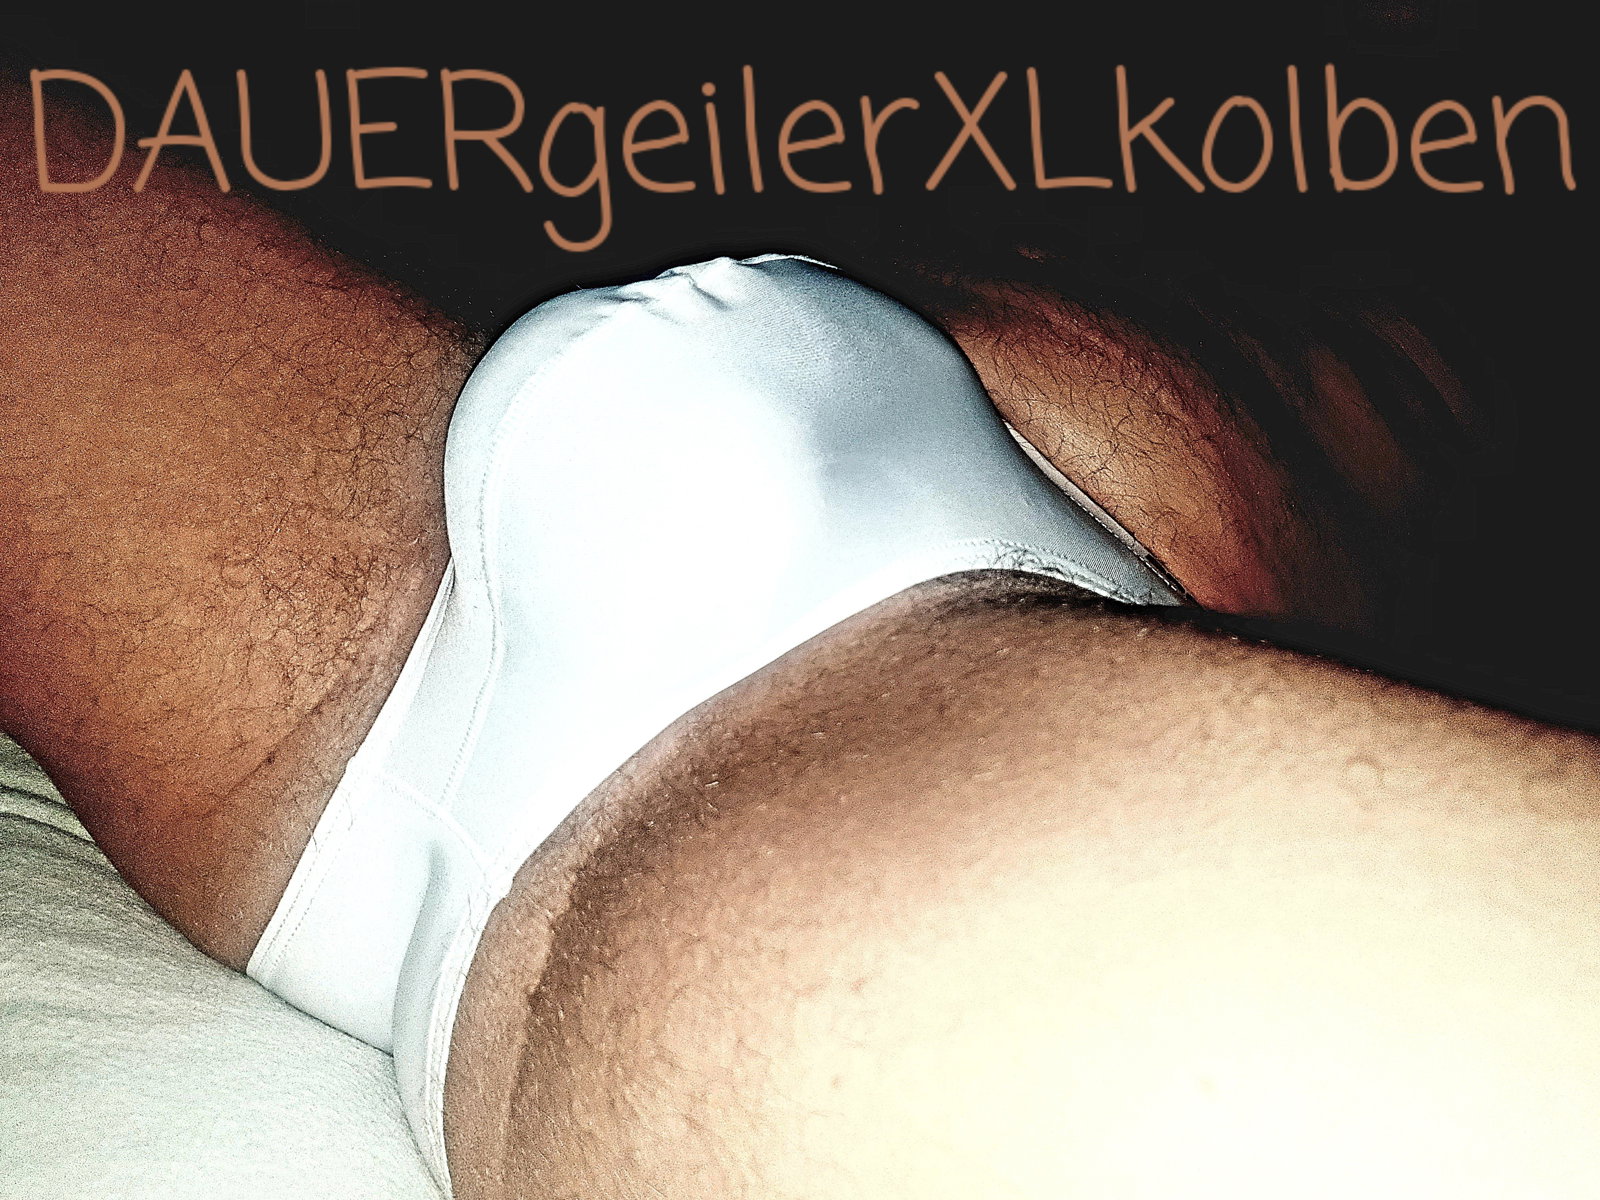 Watch the Photo by DAUERgeilerKOLBEN with the username @DAUERgeilerKOLBEN, posted on January 7, 2021. The post is about the topic Gay. and the text says 'like my hairy hole ?'